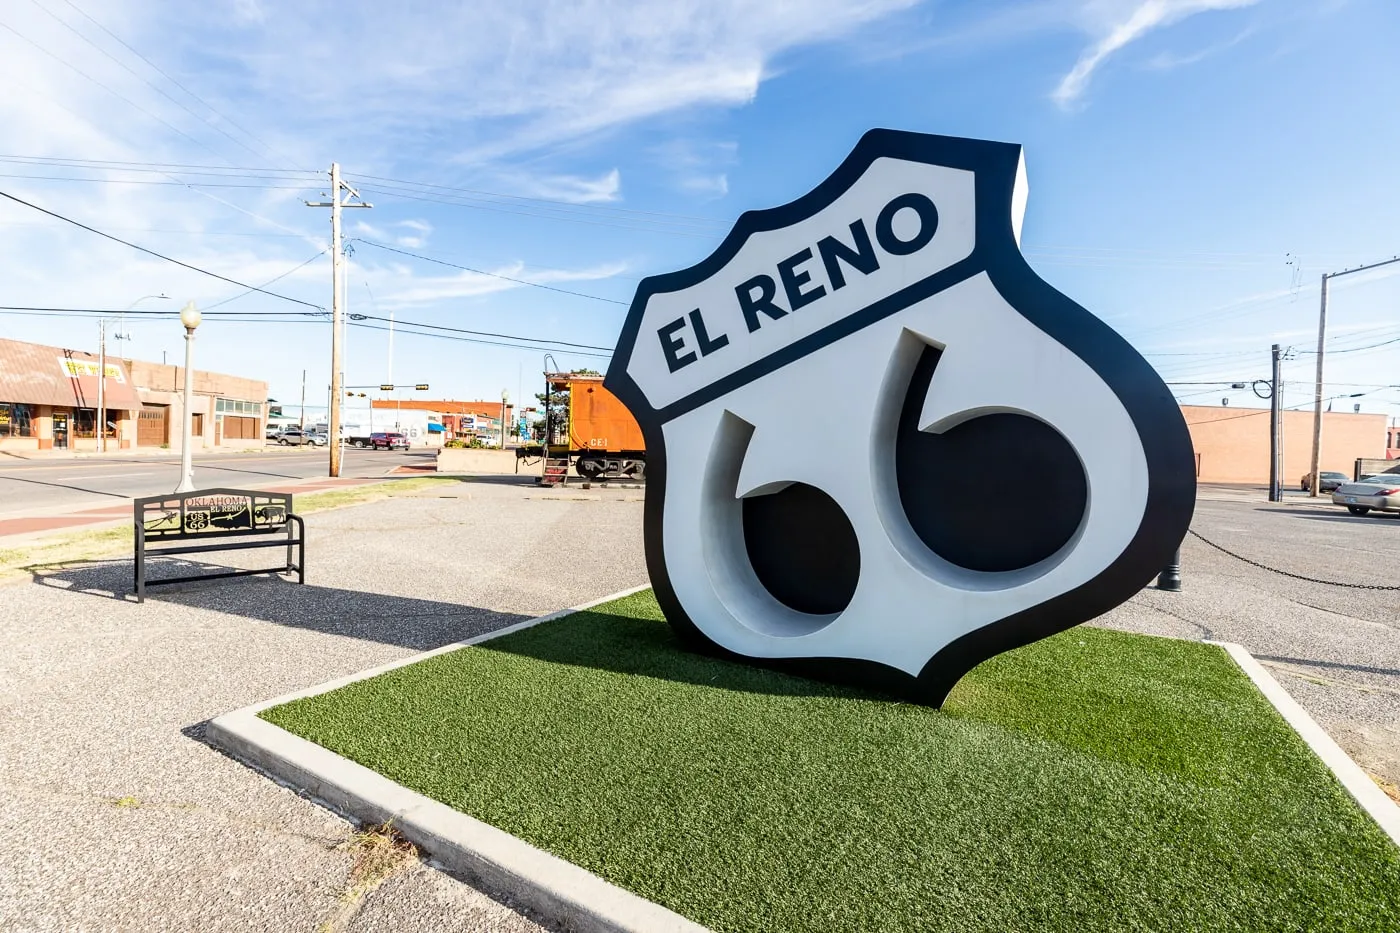 El Reno Mother Road Monument on Oklahoma Route 66 - Giant Route 66 shield photo opportunity